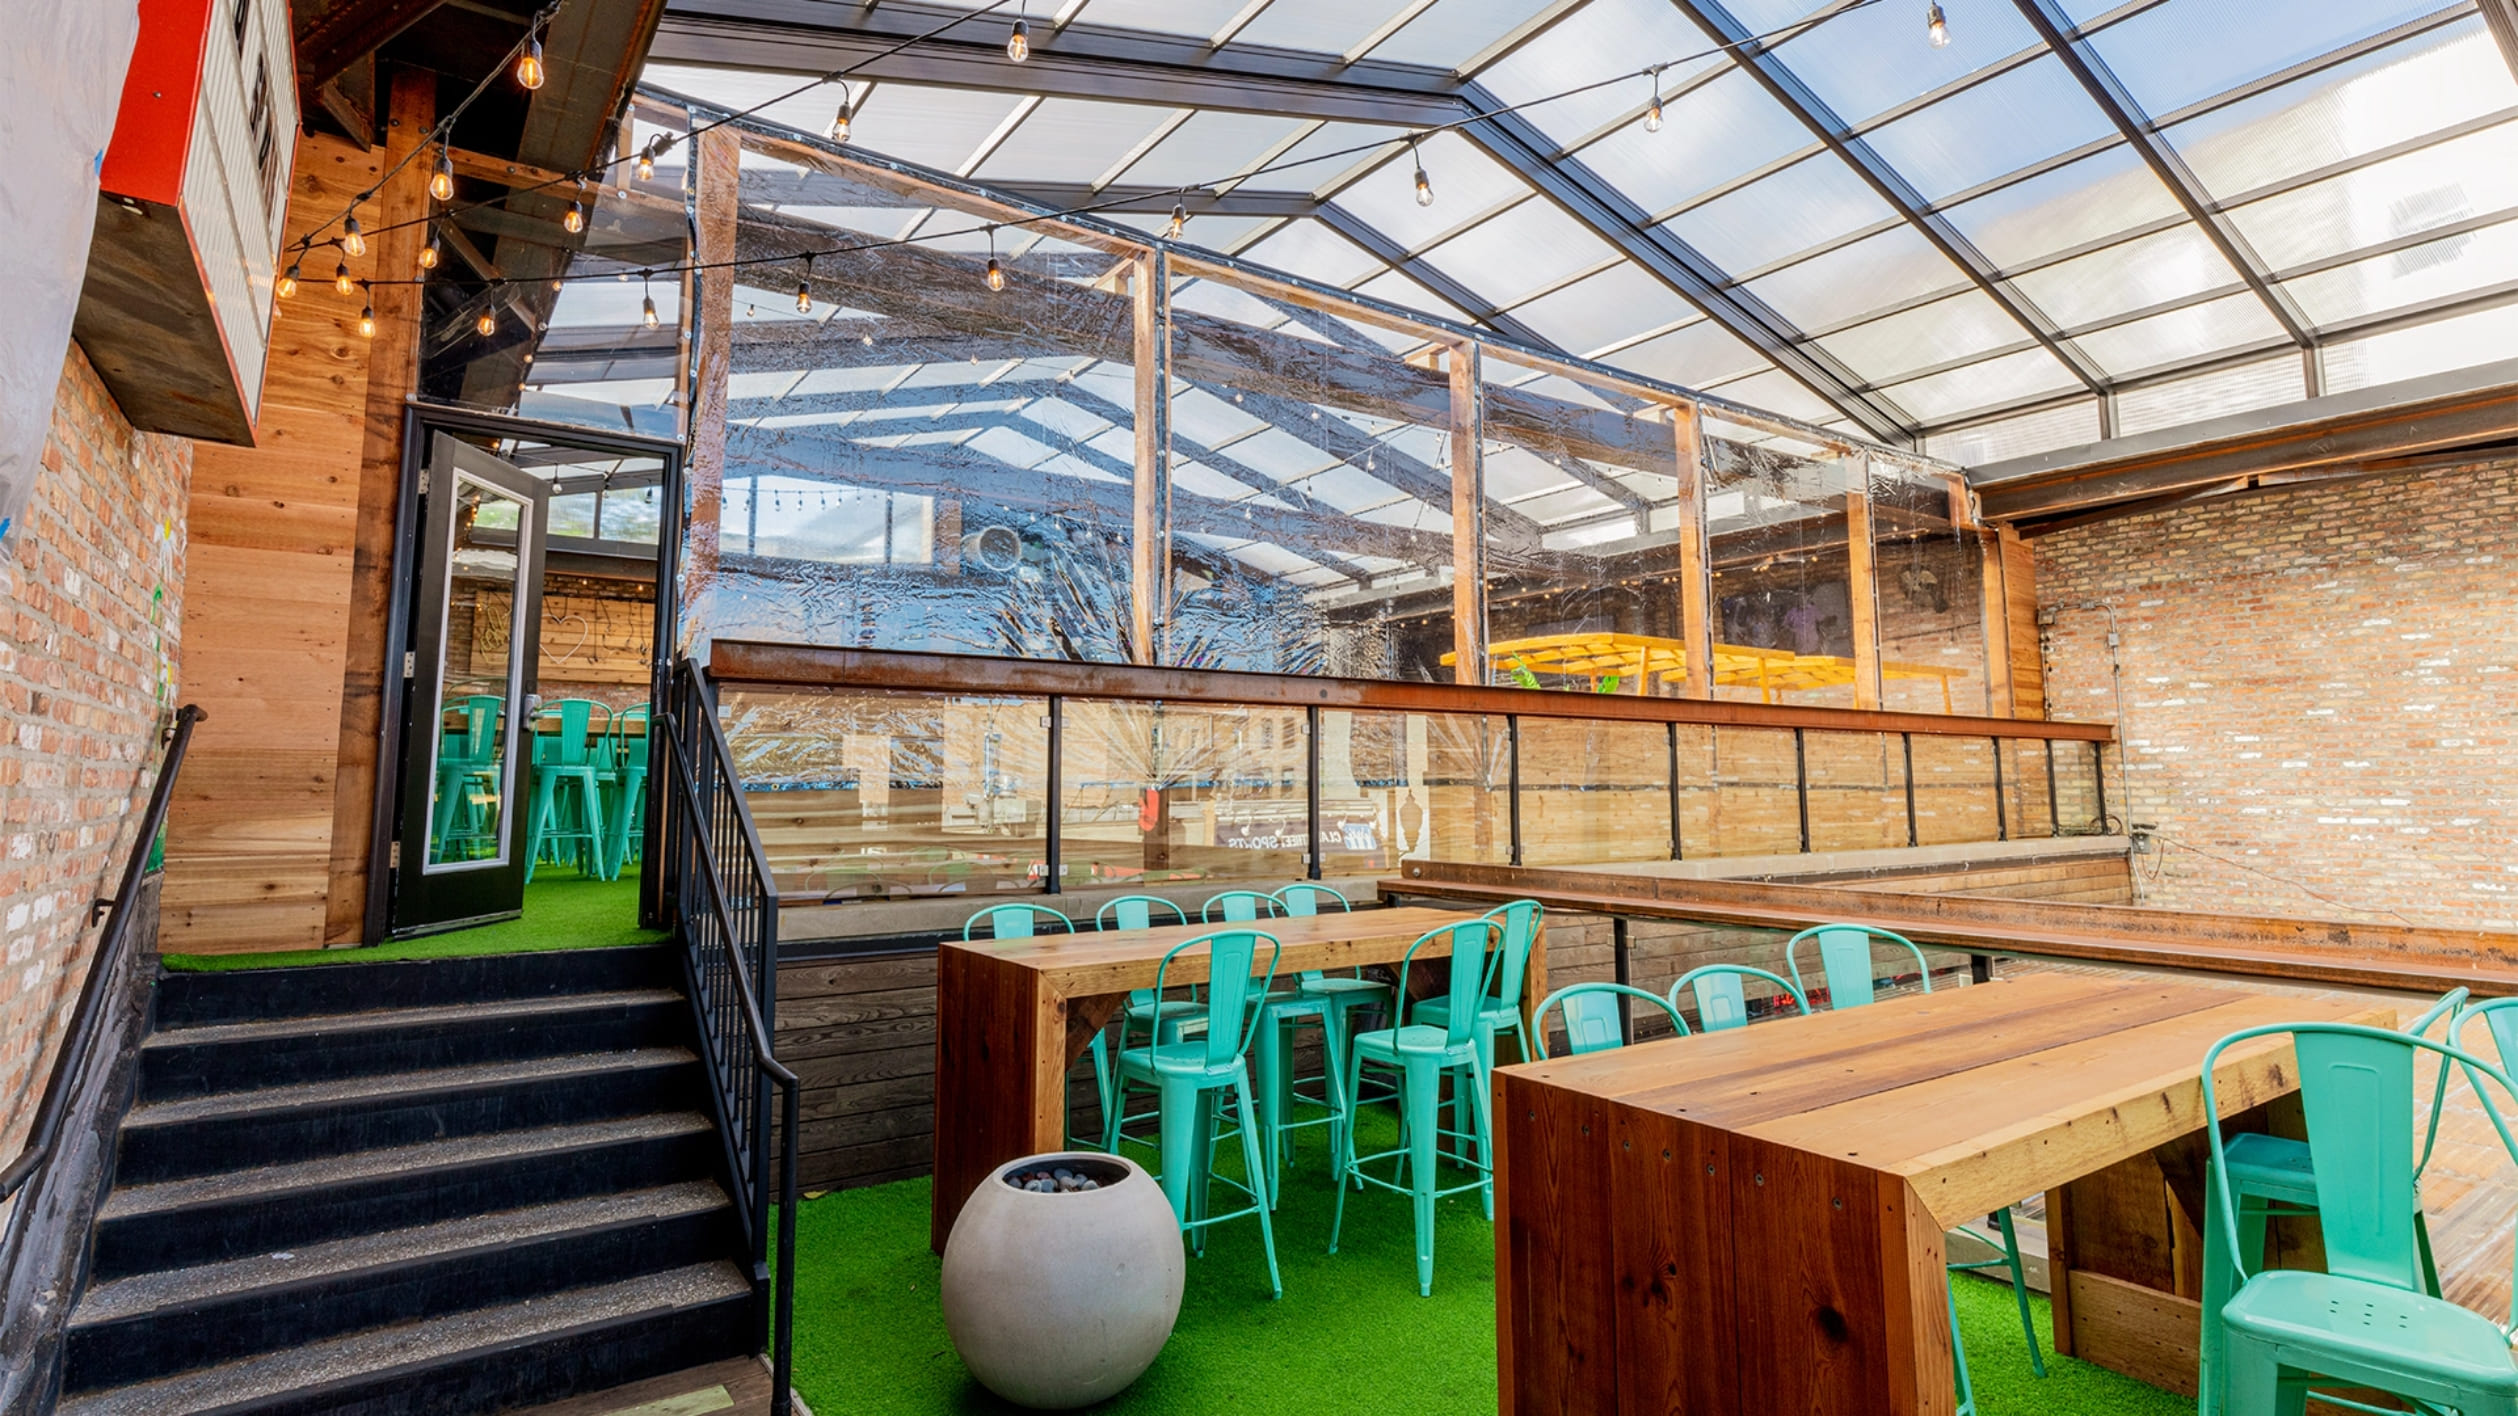 DynaDome | A restaurant with a glass roof and green chairs, creating a cozy and inviting dining experience.